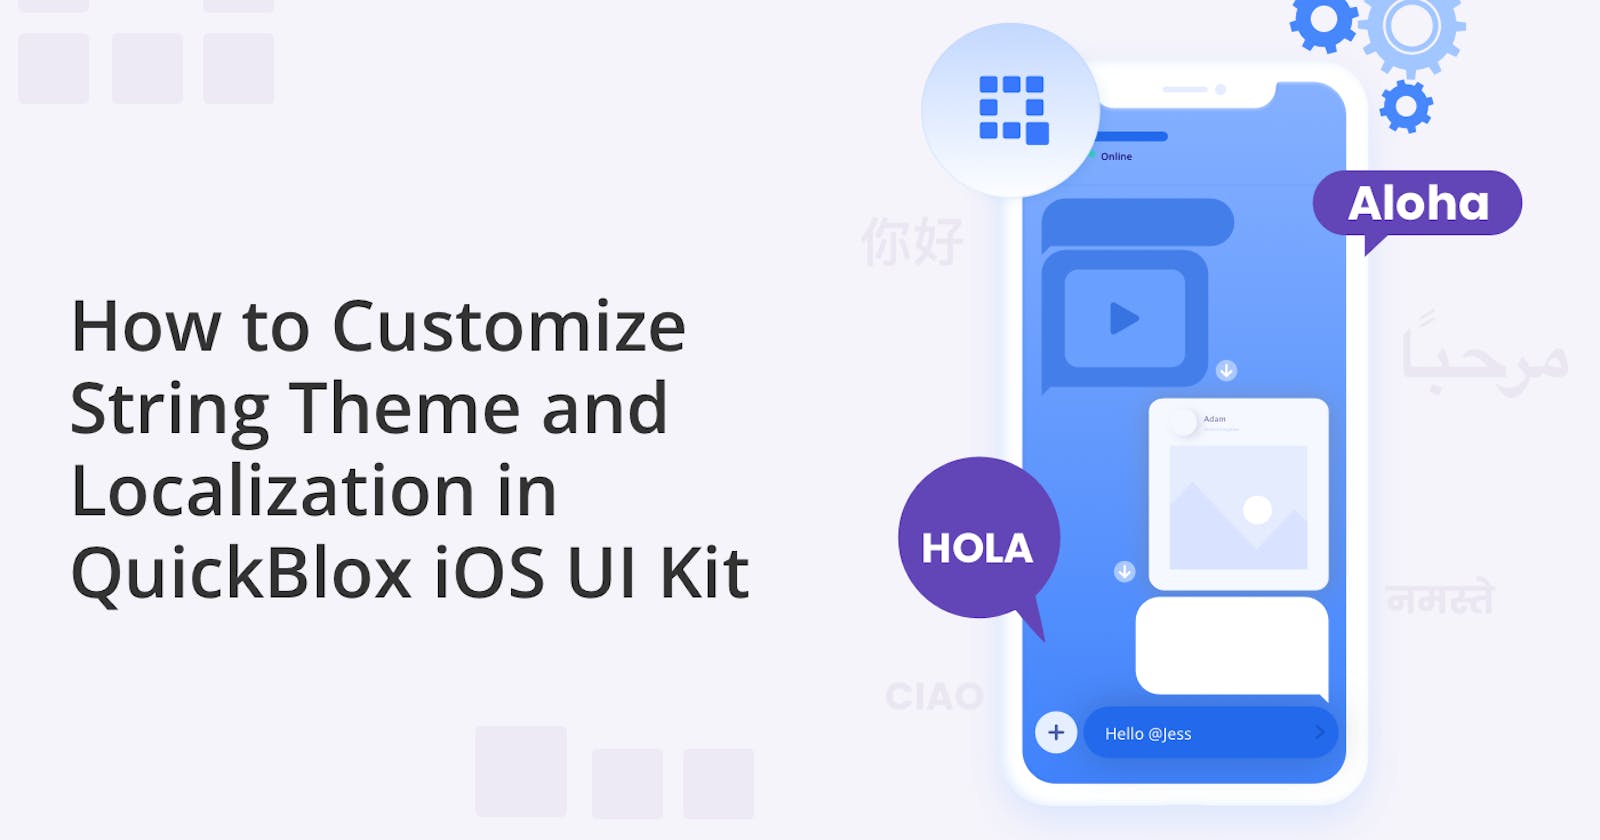 How to Customize String Theme and Localization in QuickBlox iOS UI Kit